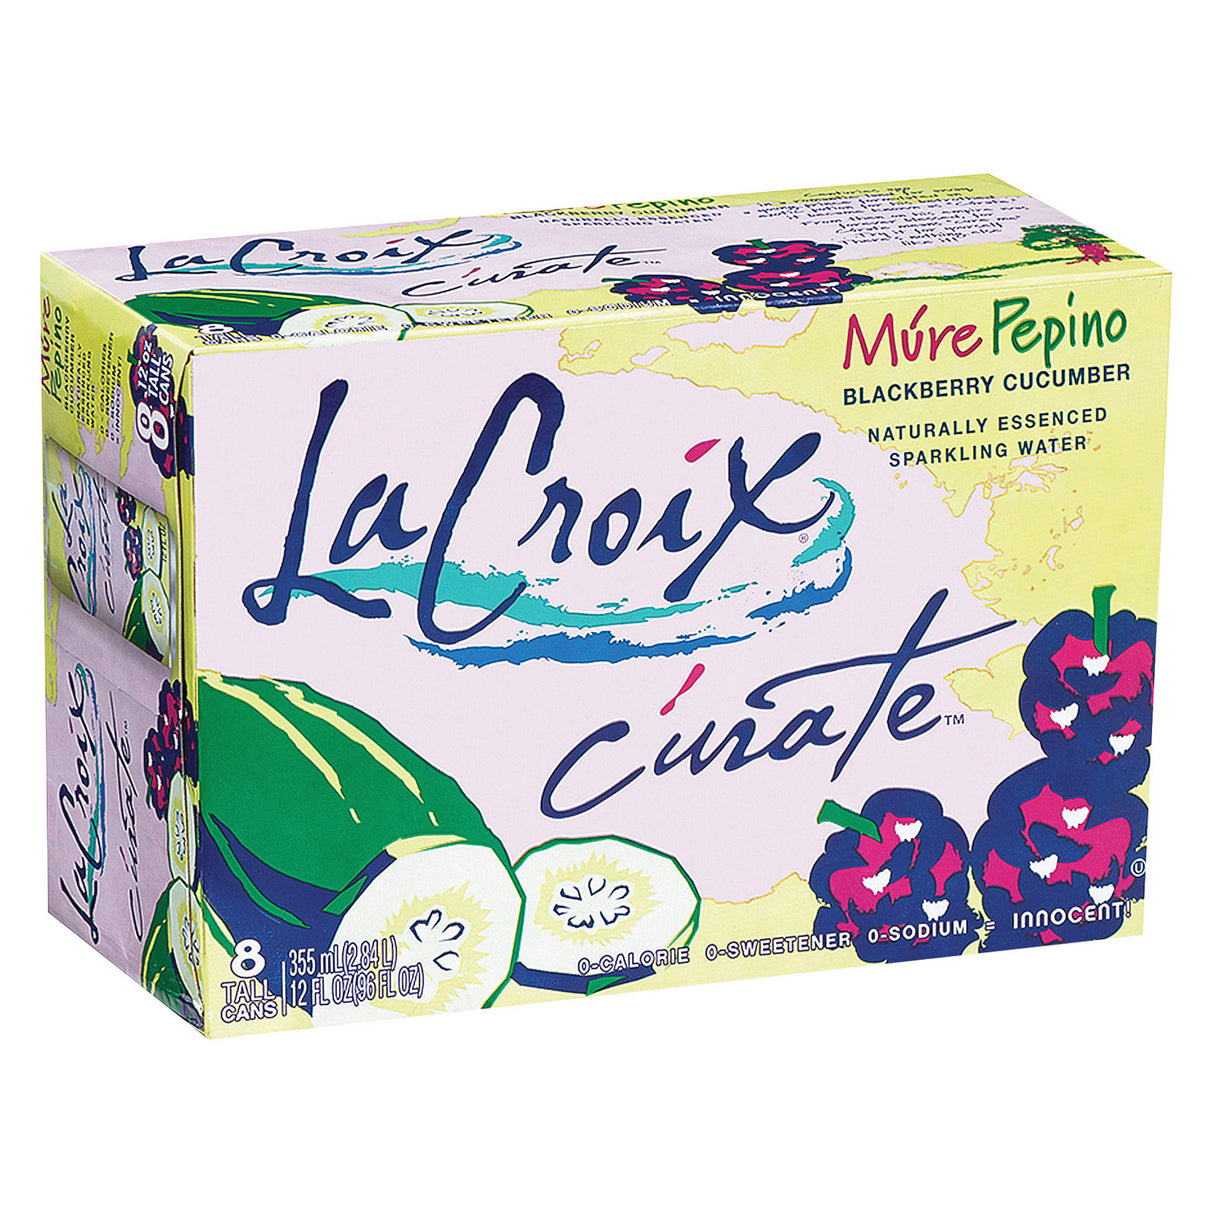 Lacroix Sparkling Water - Mure Pepino - 8 Fl Oz (Pack of 3) - Cozy Farm 